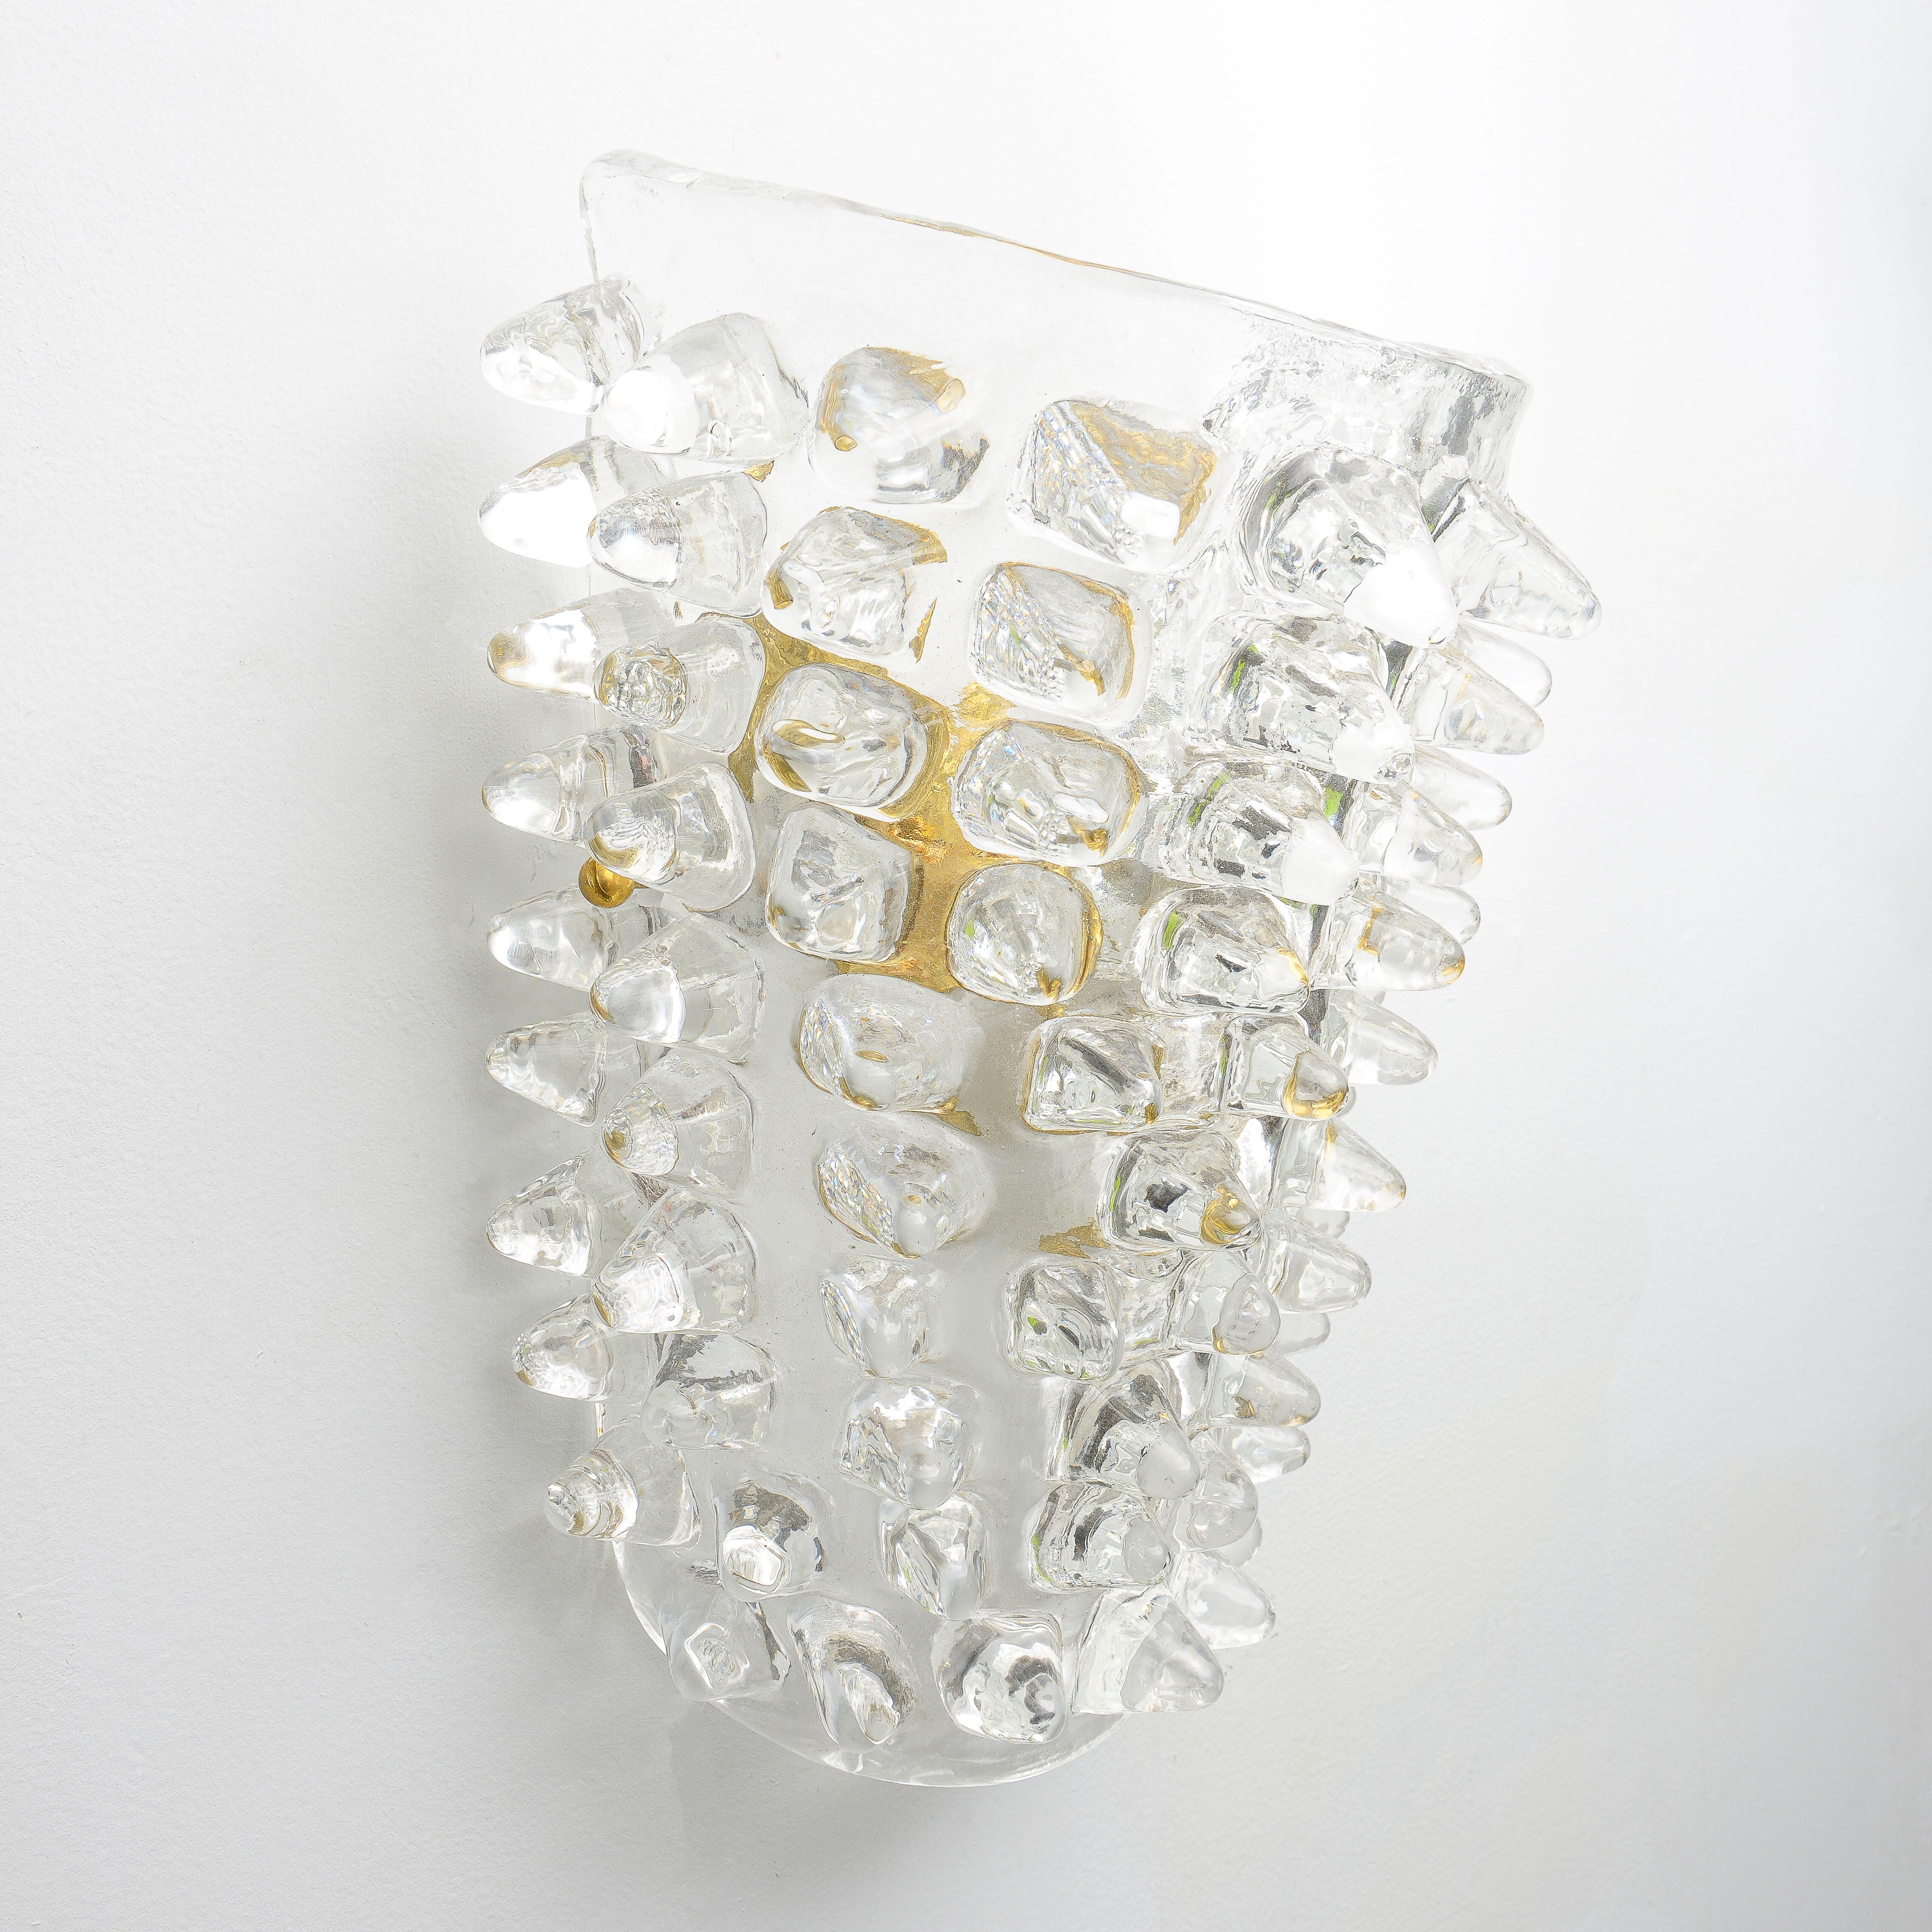 Italian Contemporary Murano Glass Sconces in the Manner of Barovier Toso For Sale